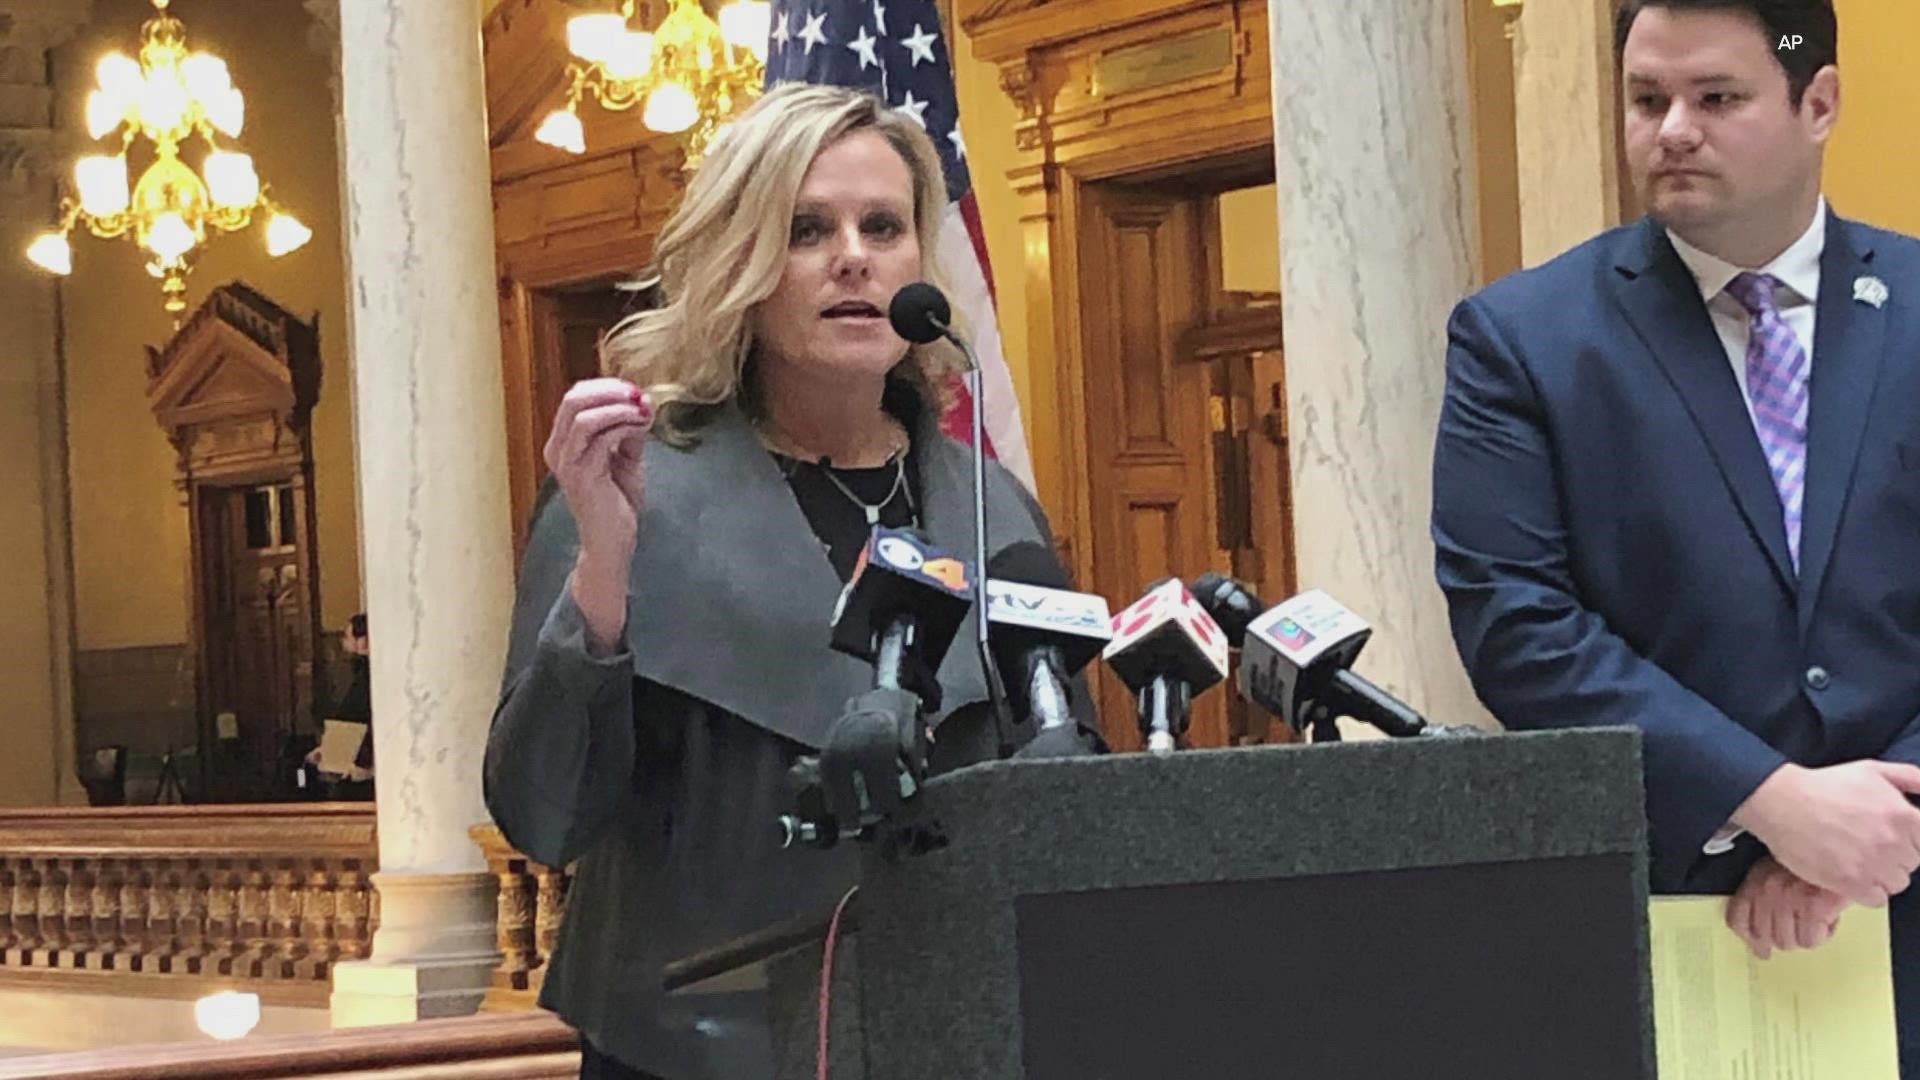 Jennifer McCormick, the former Superintendent of Public Instruction, tells us she is considering a run for Indiana Governor as a Democrat.